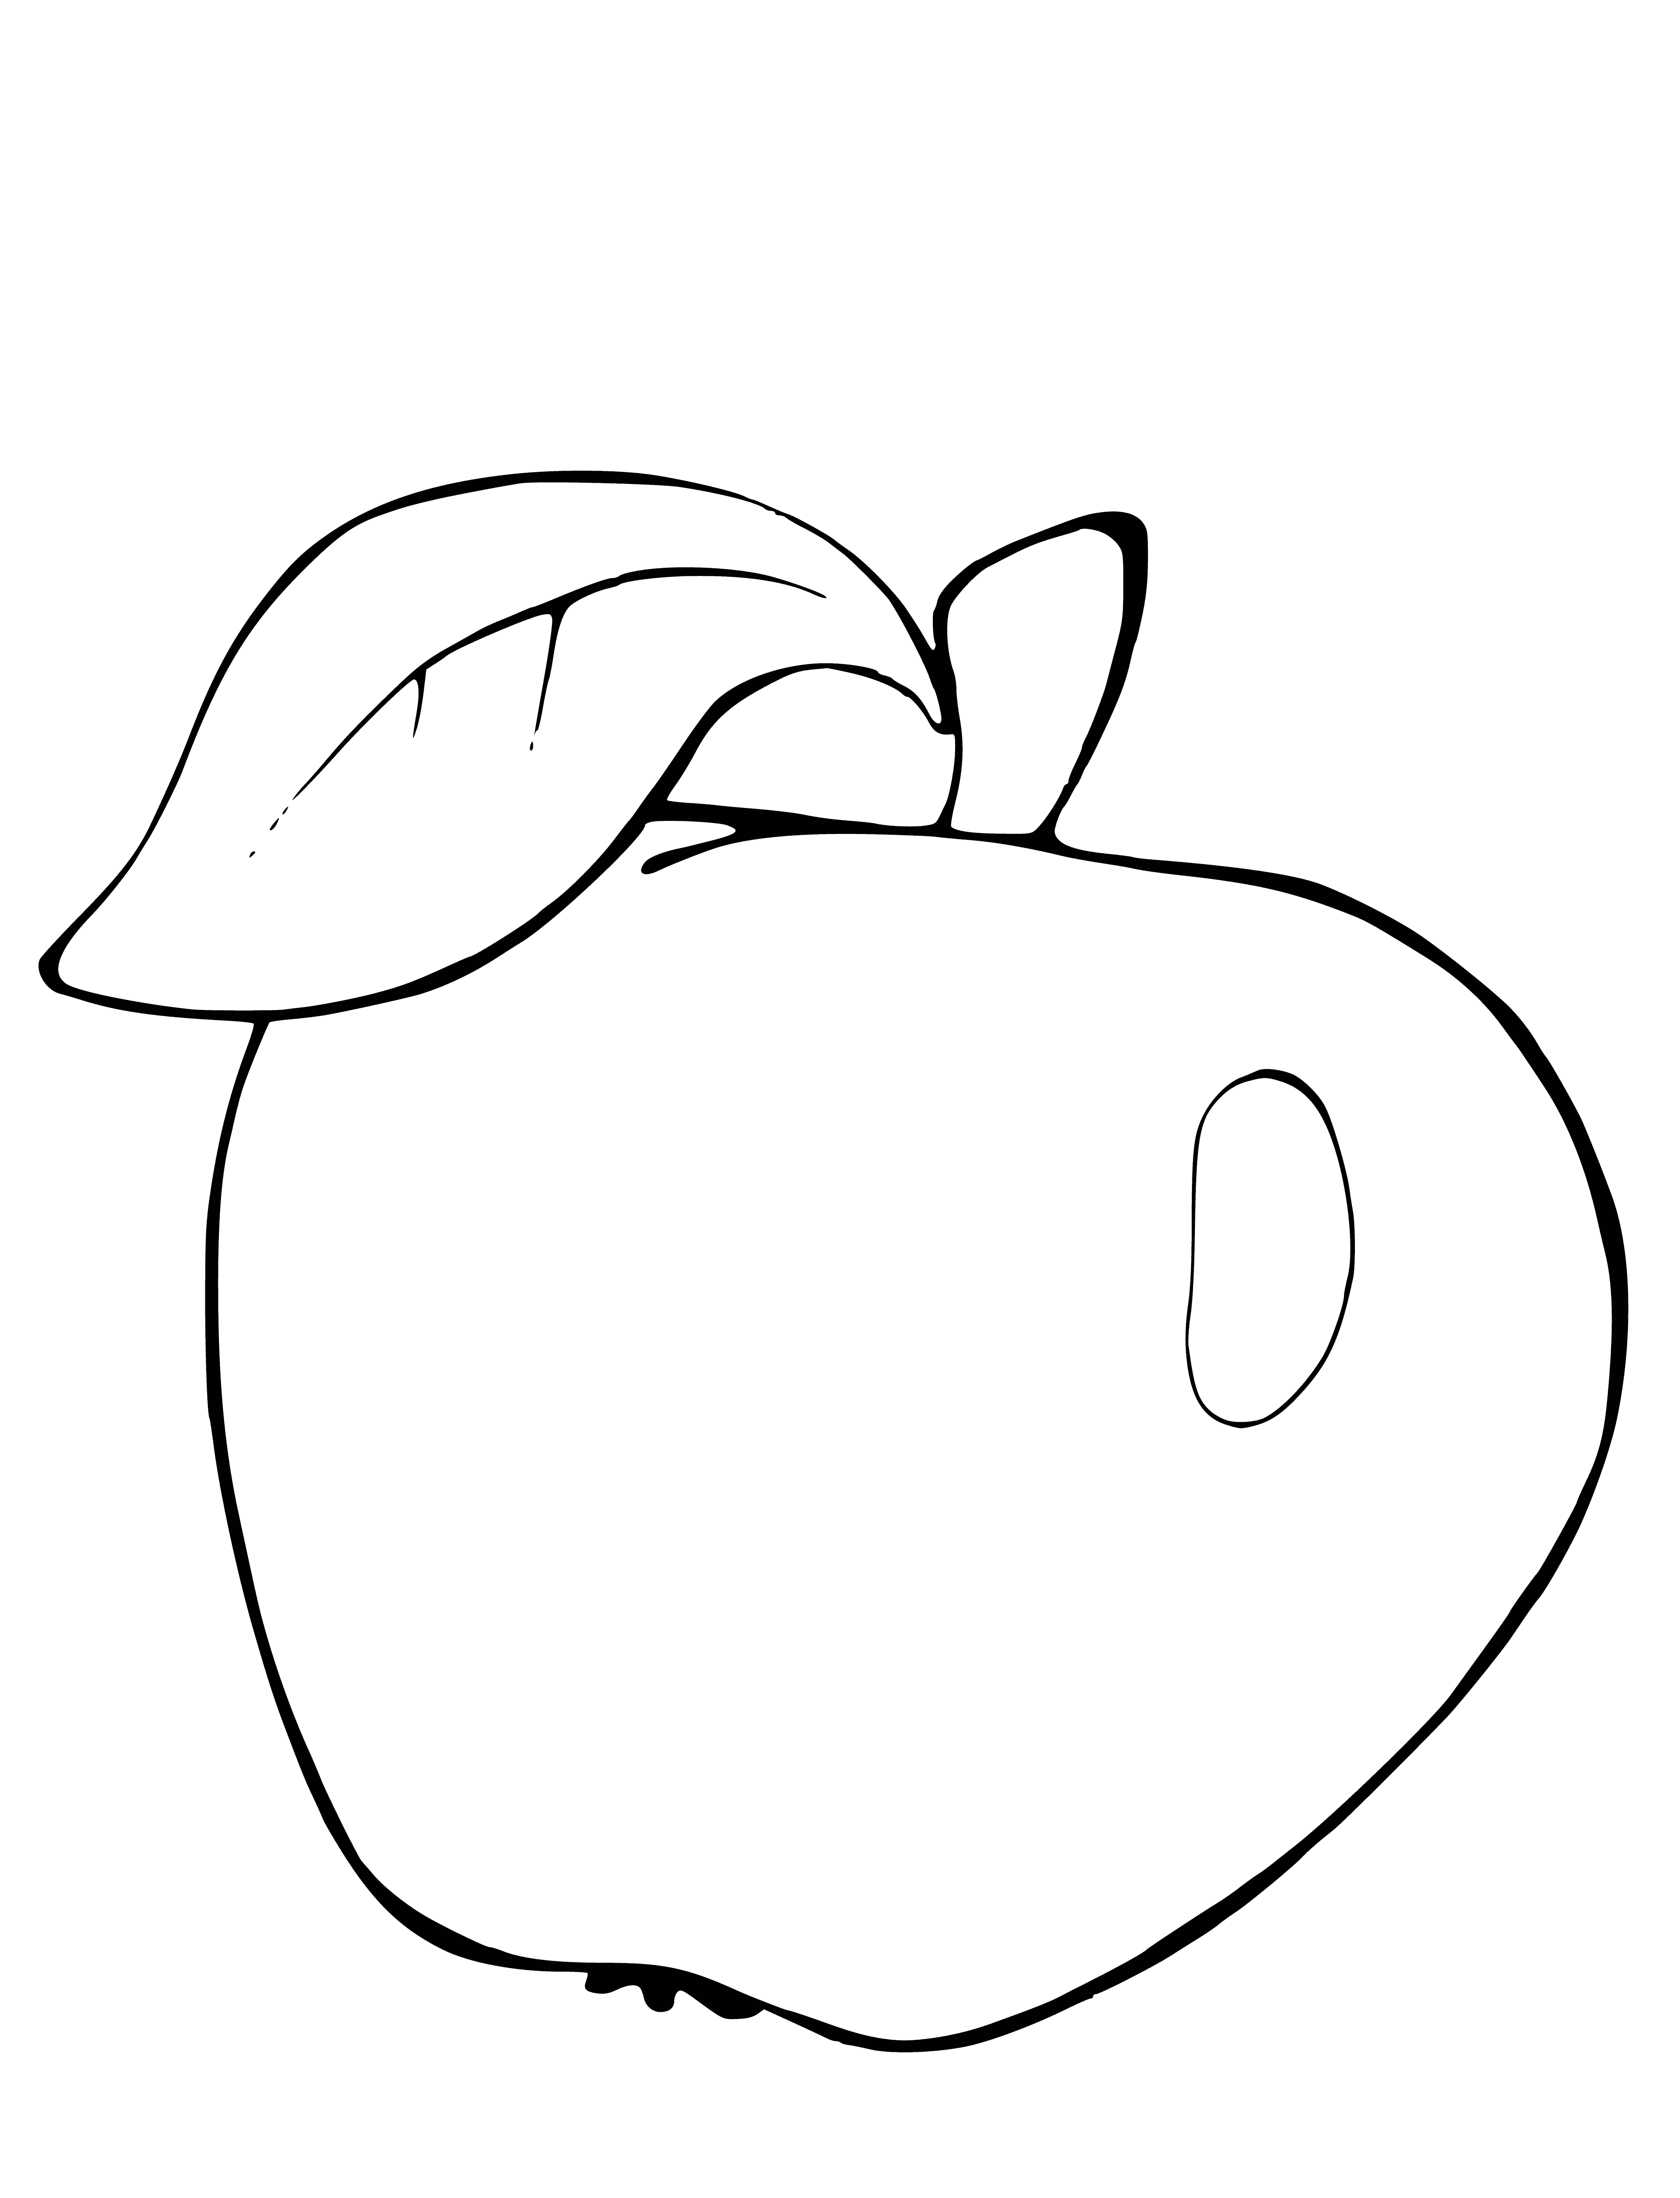 coloring page: Big, juicy apple - red & green with stem attached.